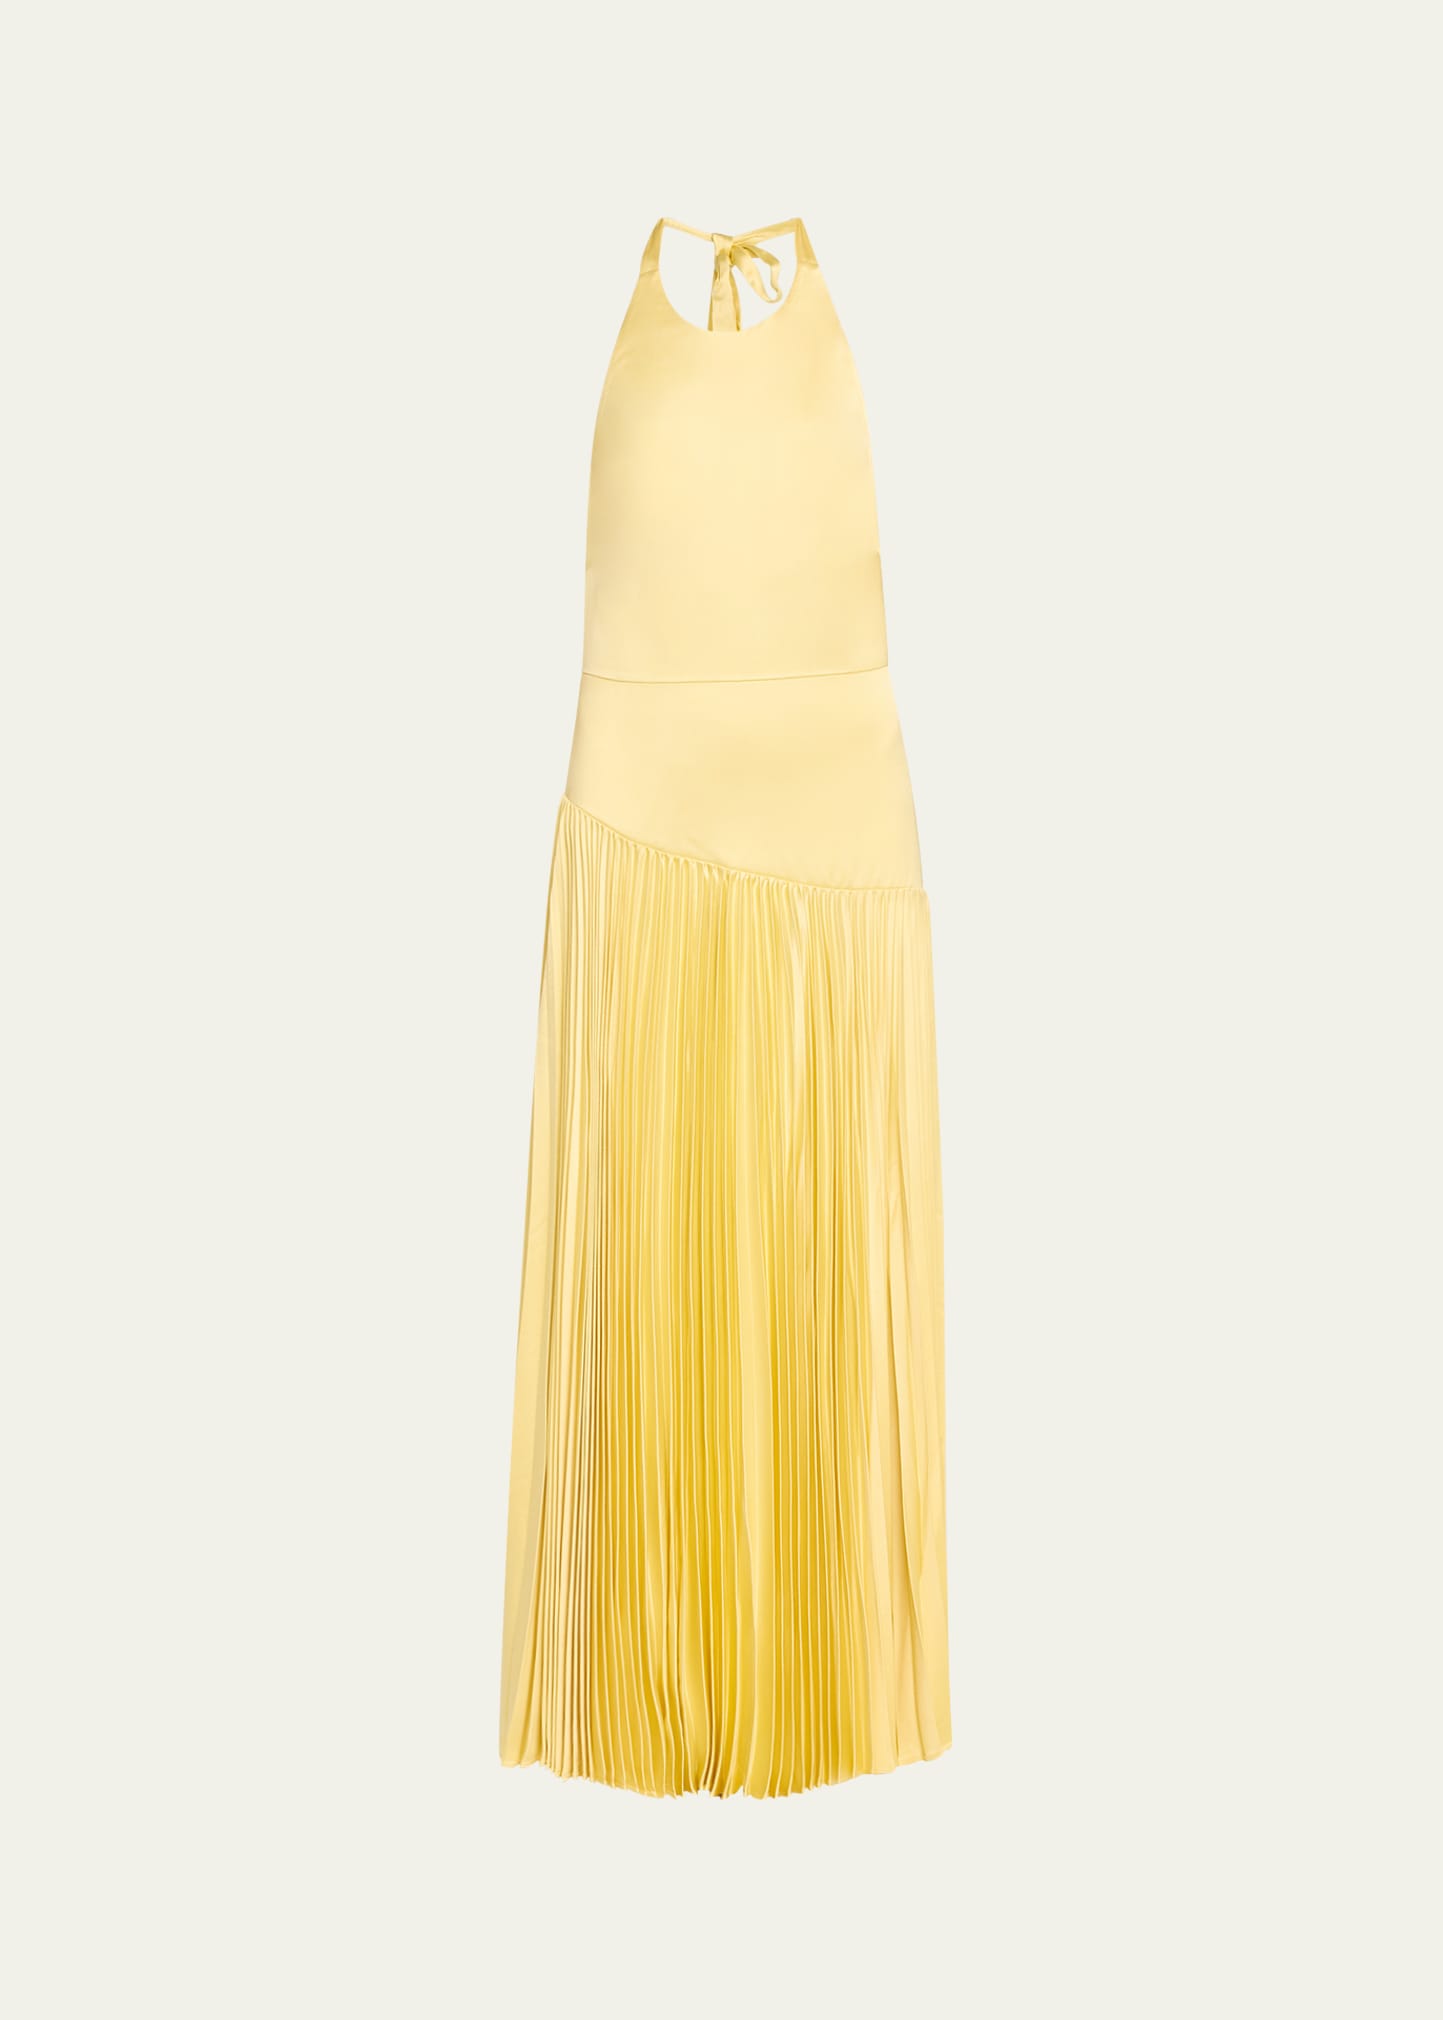 Alexis Saab Pleated Satin Backless Halter Dress In Yellow